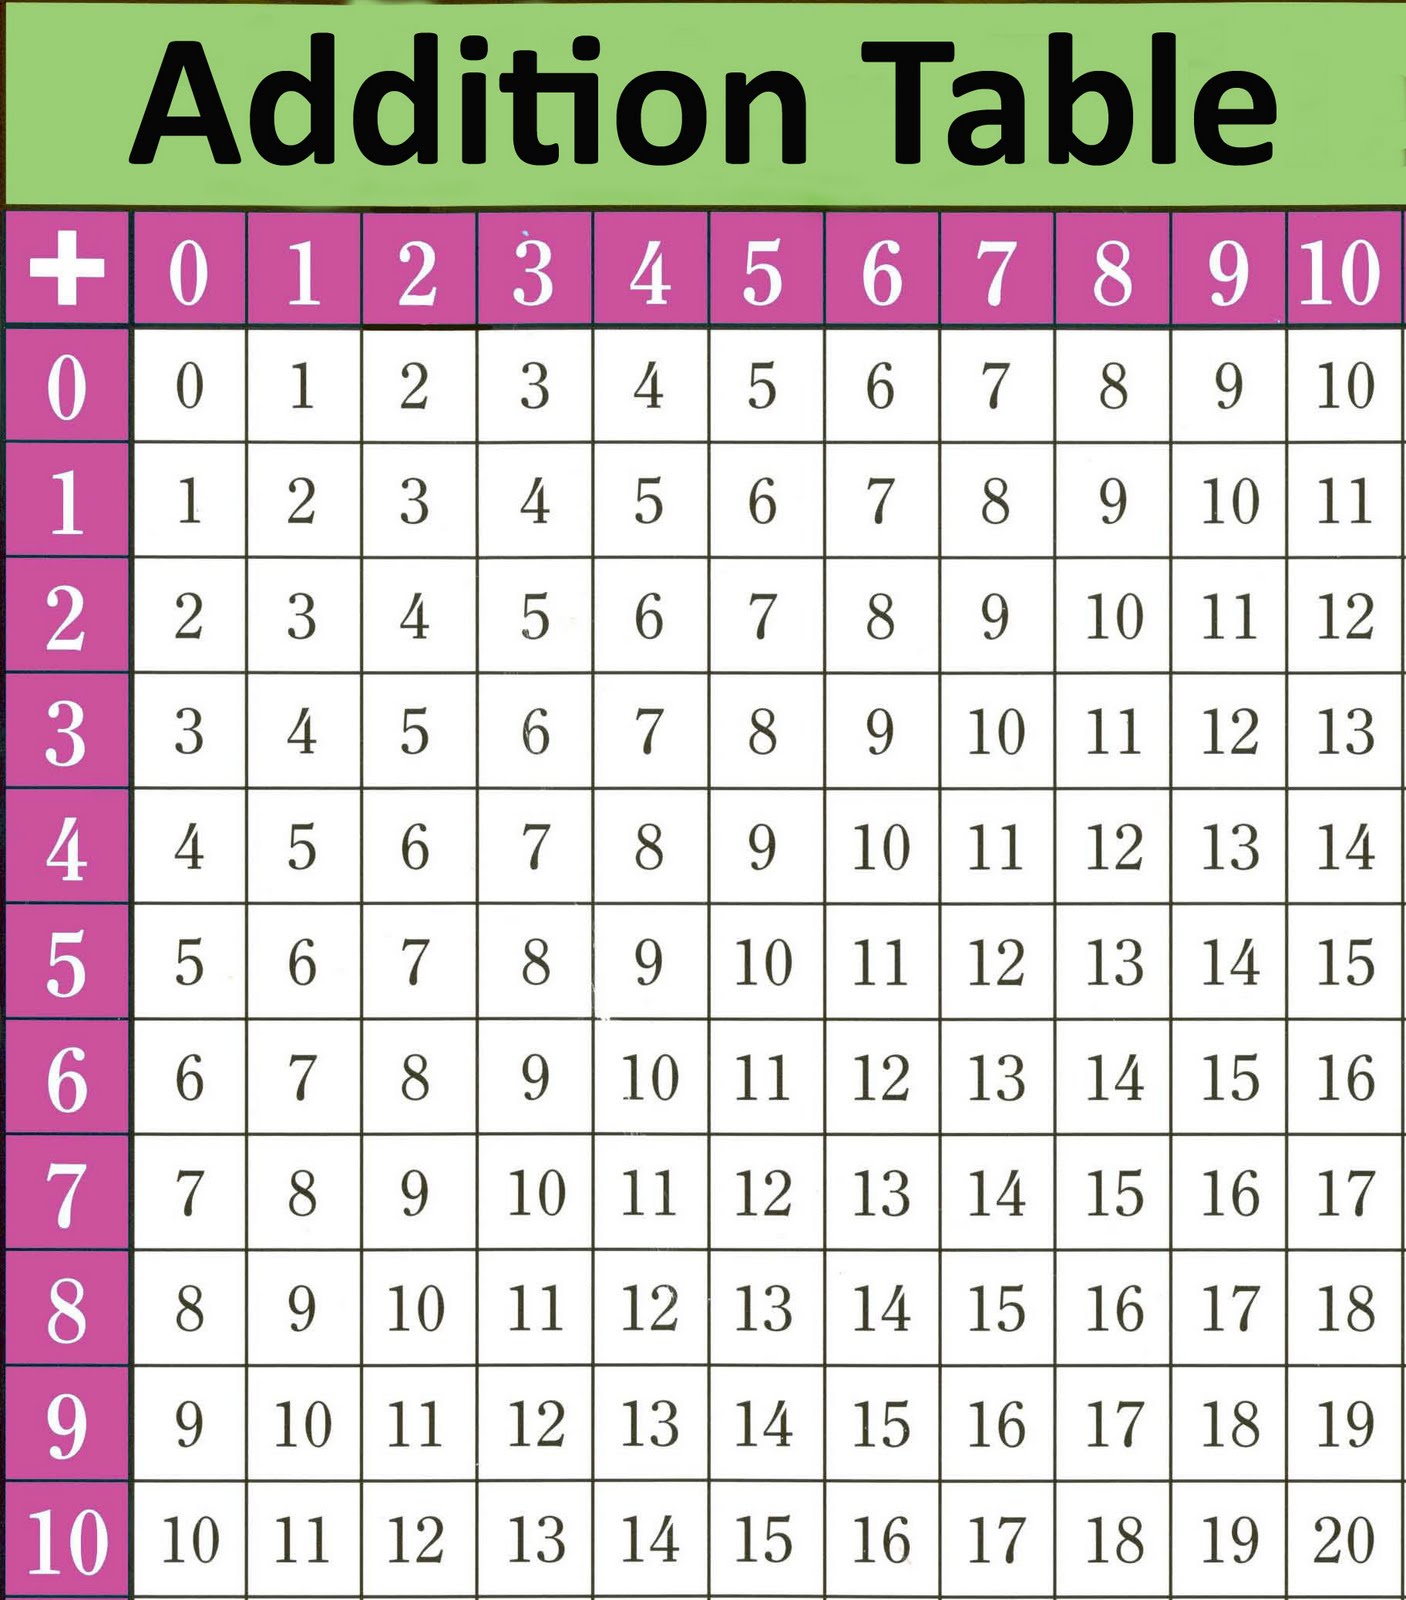 Addition Fact Table Chart